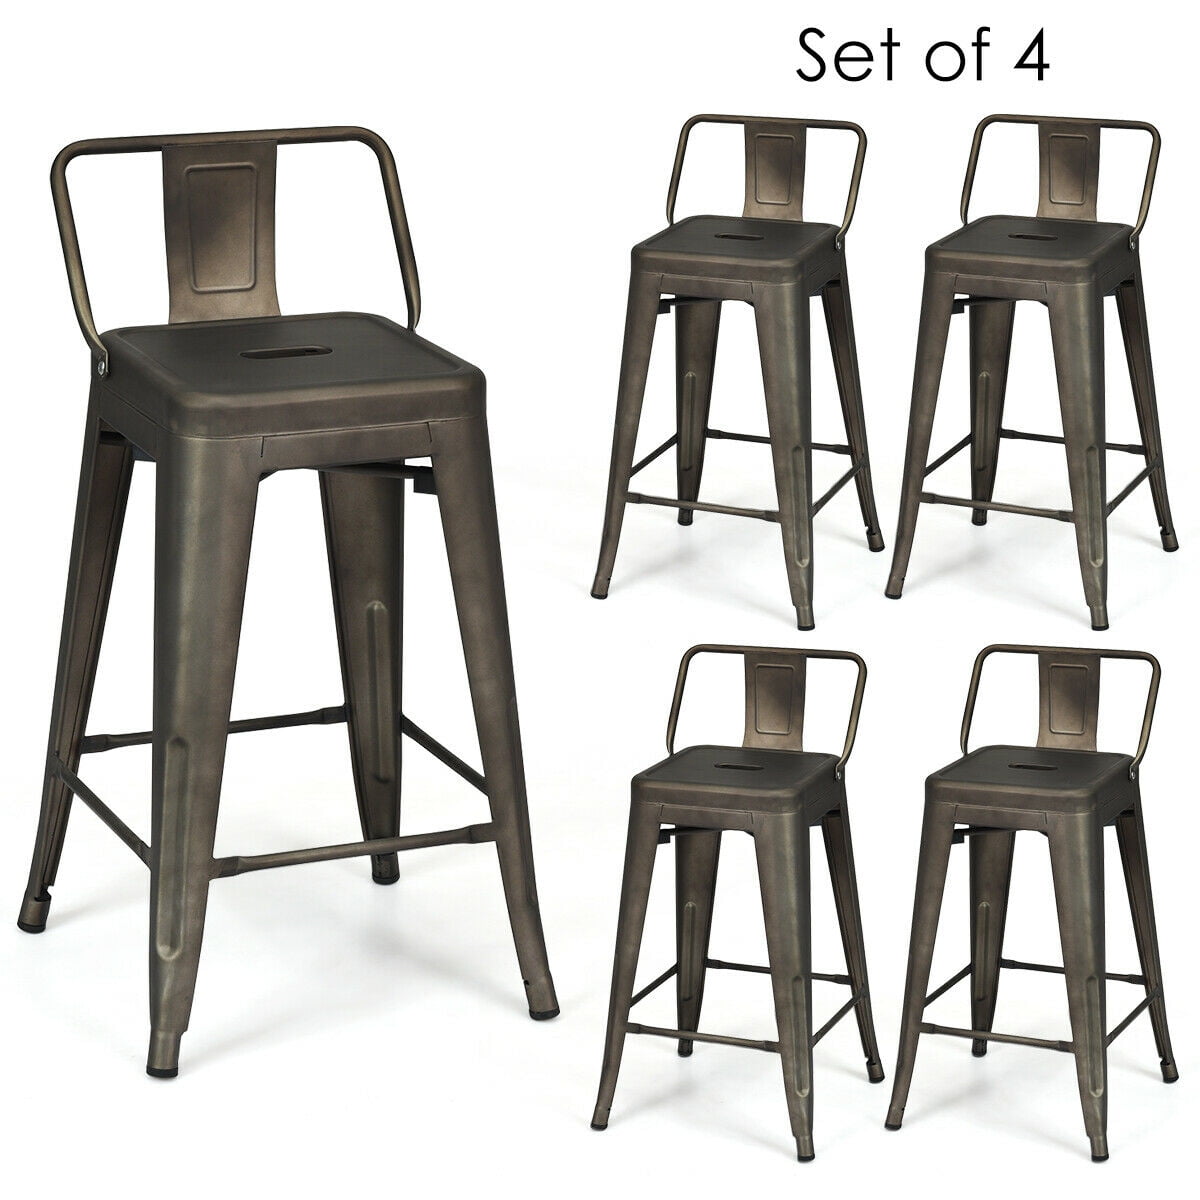 Details about   24 Inch Set of 4 Cafe Side Chairs with Rubber Feet and Removable Back Bars Cafes 